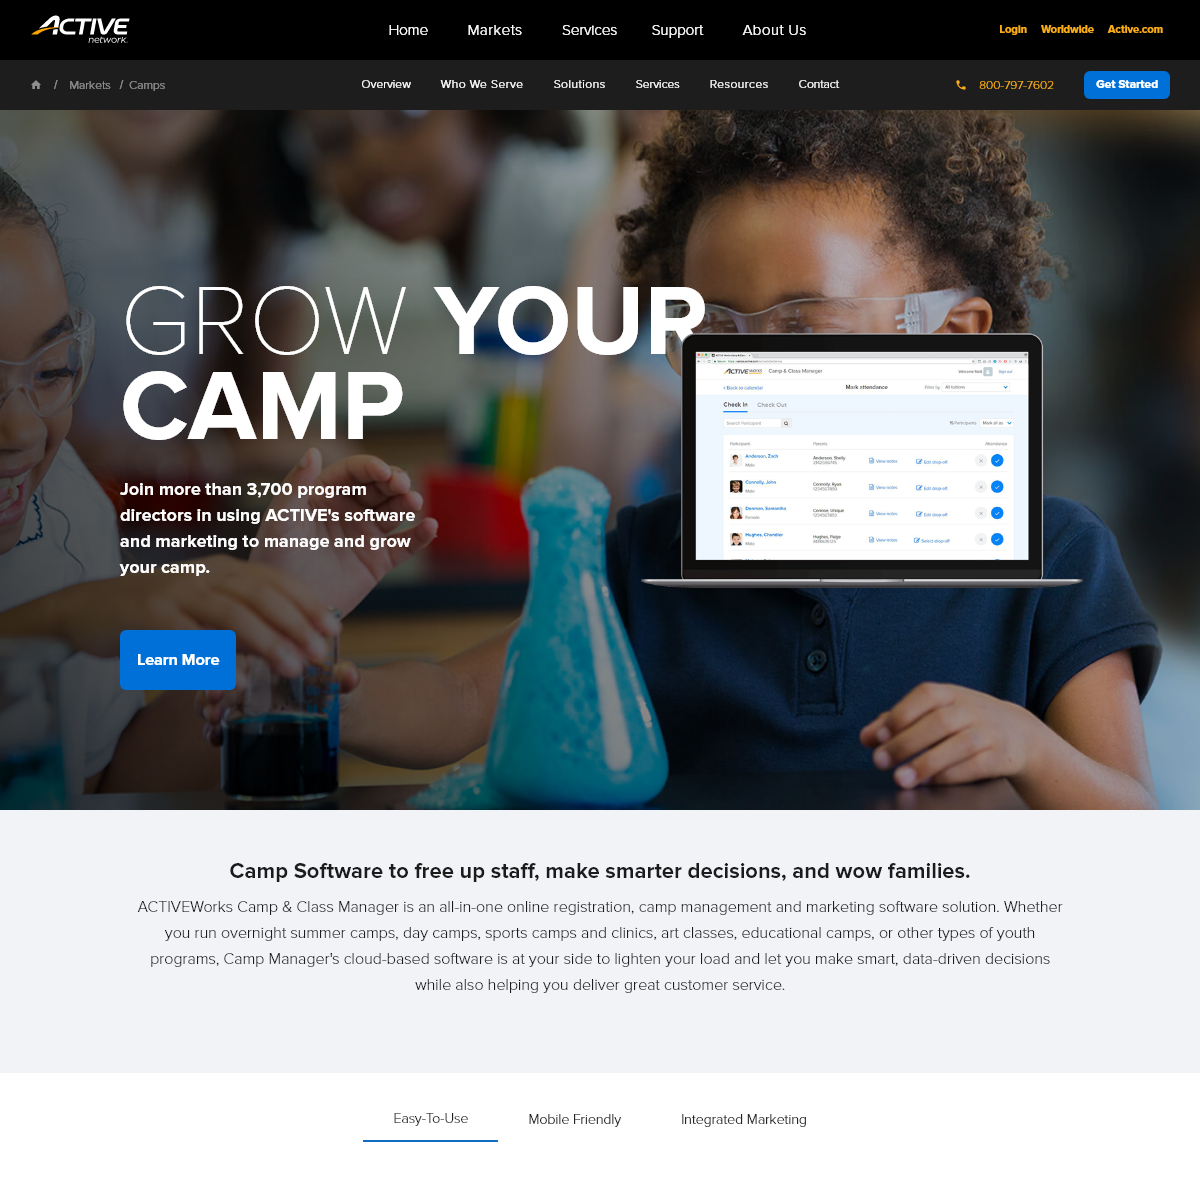 A complete backup of activecamps.com